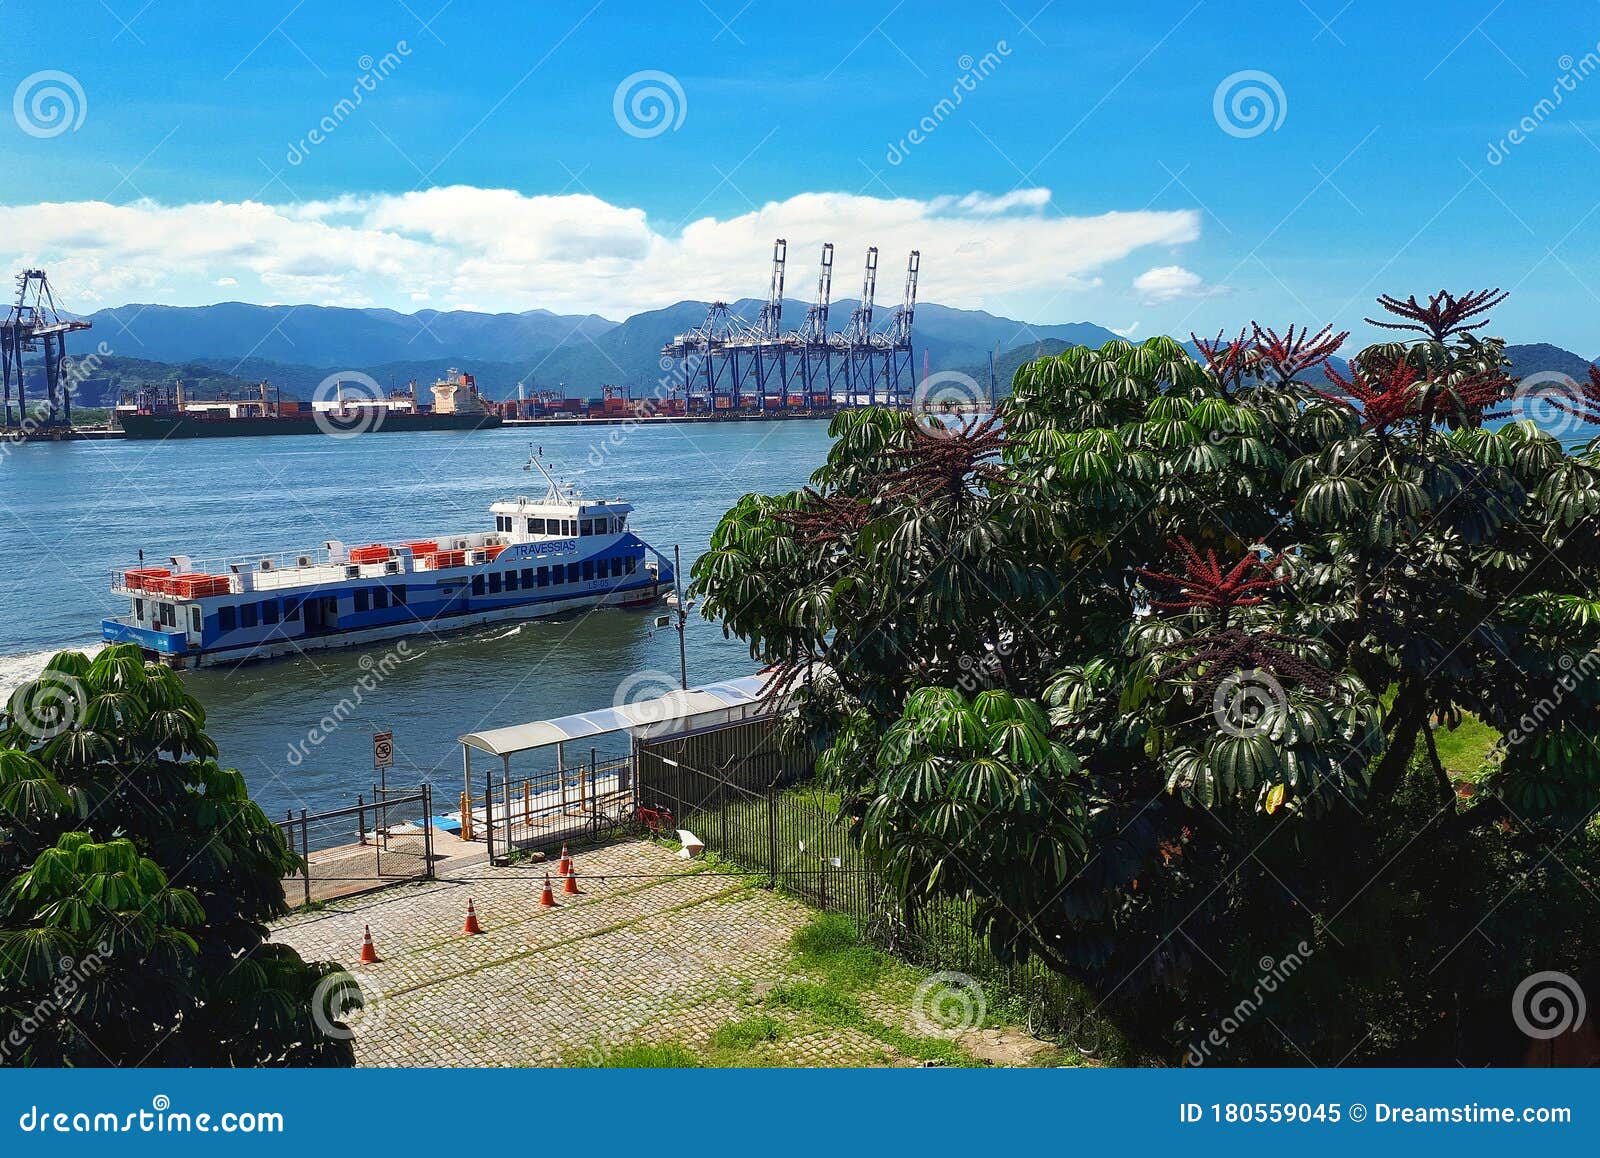 the ocean is cowded of ships in santos.